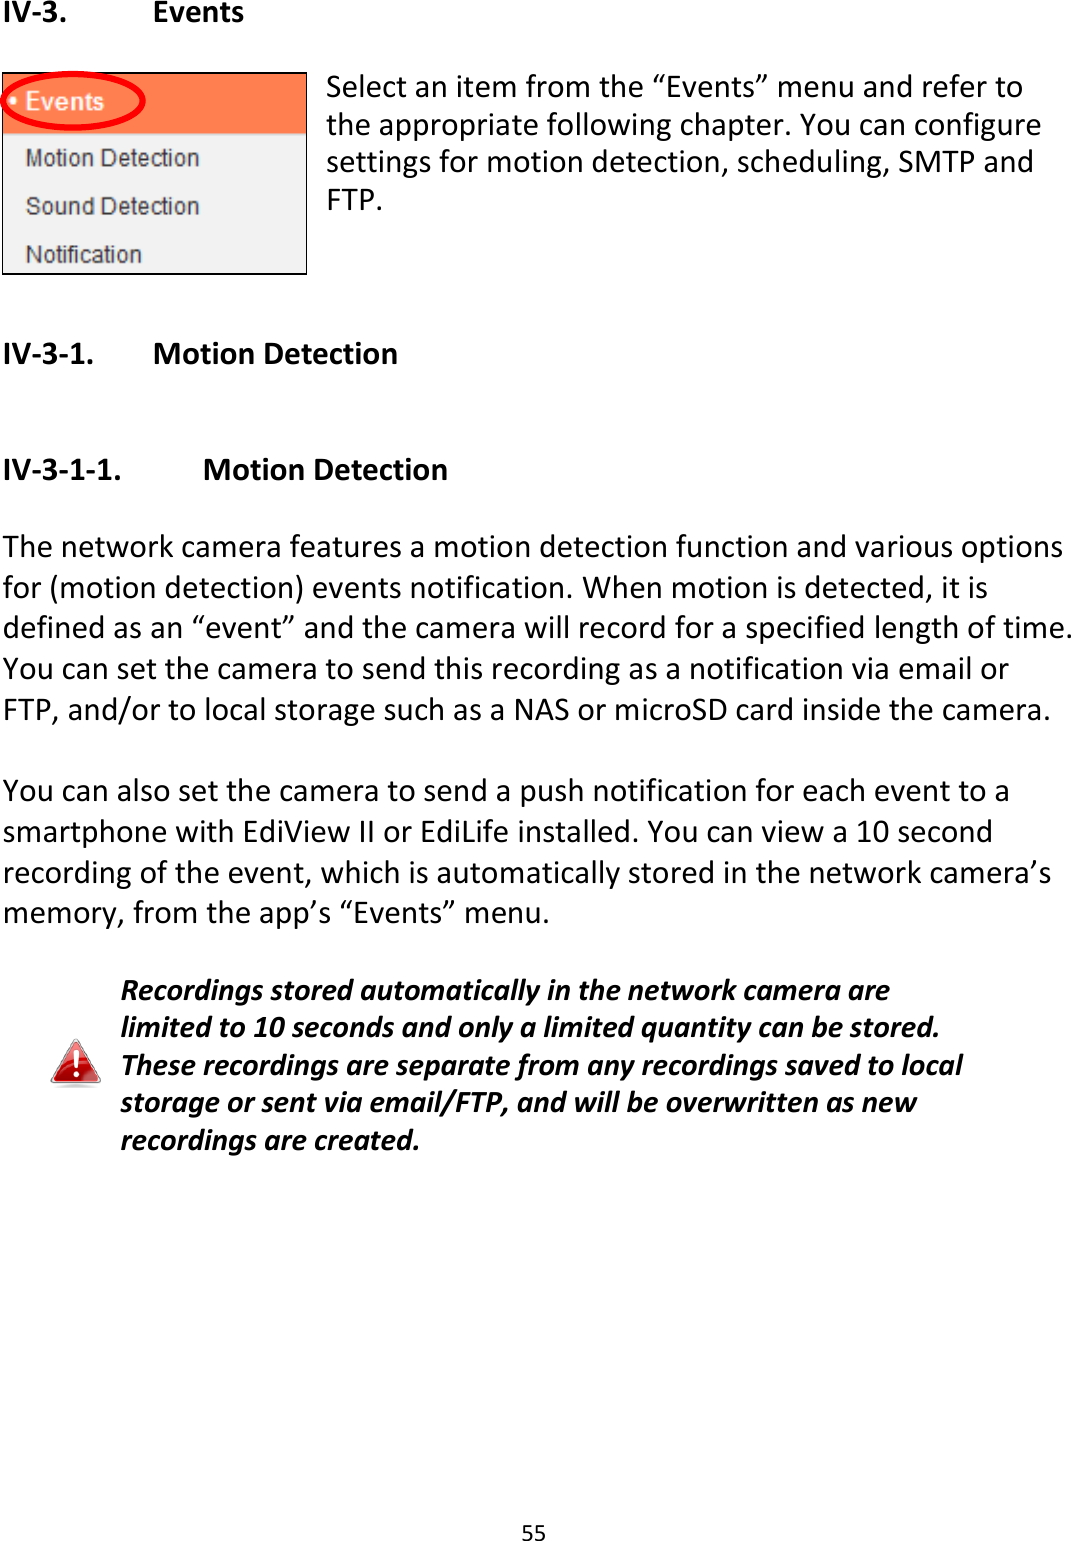 55  IV-3.    Events  Select an item from the “Events” menu and refer to the appropriate following chapter. You can configure settings for motion detection, scheduling, SMTP and FTP.   IV-3-1.   Motion Detection  IV-3-1-1.    Motion Detection  The network camera features a motion detection function and various options for (motion detection) events notification. When motion is detected, it is defined as an “event” and the camera will record for a specified length of time. You can set the camera to send this recording as a notification via email or FTP, and/or to local storage such as a NAS or microSD card inside the camera.    You can also set the camera to send a push notification for each event to a smartphone with EdiView II or EdiLife installed. You can view a 10 second recording of the event, which is automatically stored in the network camera’s memory, from the app’s “Events” menu.  Recordings stored automatically in the network camera are limited to 10 seconds and only a limited quantity can be stored. These recordings are separate from any recordings saved to local storage or sent via email/FTP, and will be overwritten as new recordings are created.  